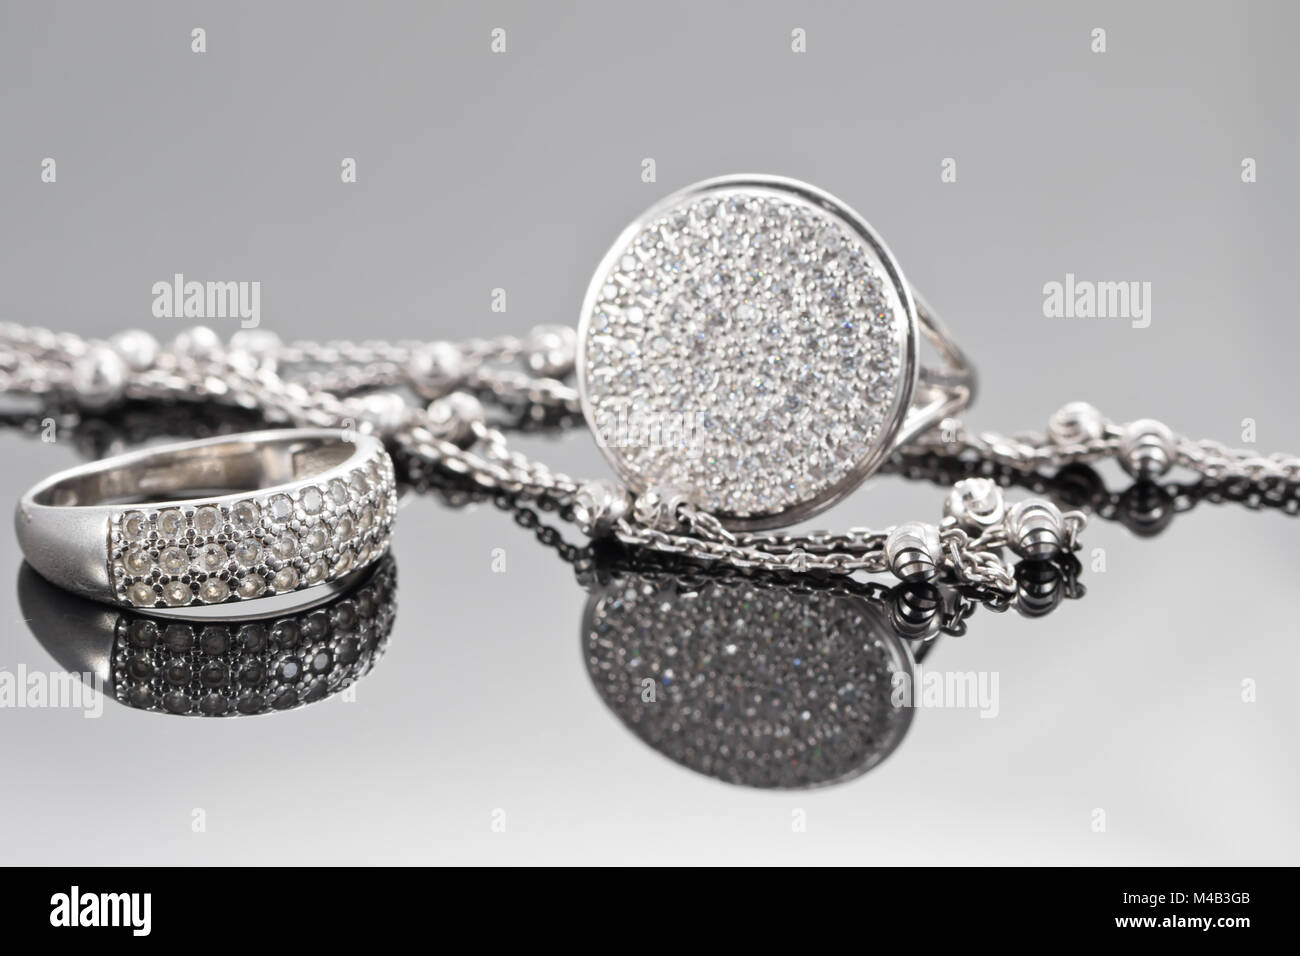 Unusual beautiful silver chain and a silver ring with gems Stock Photo